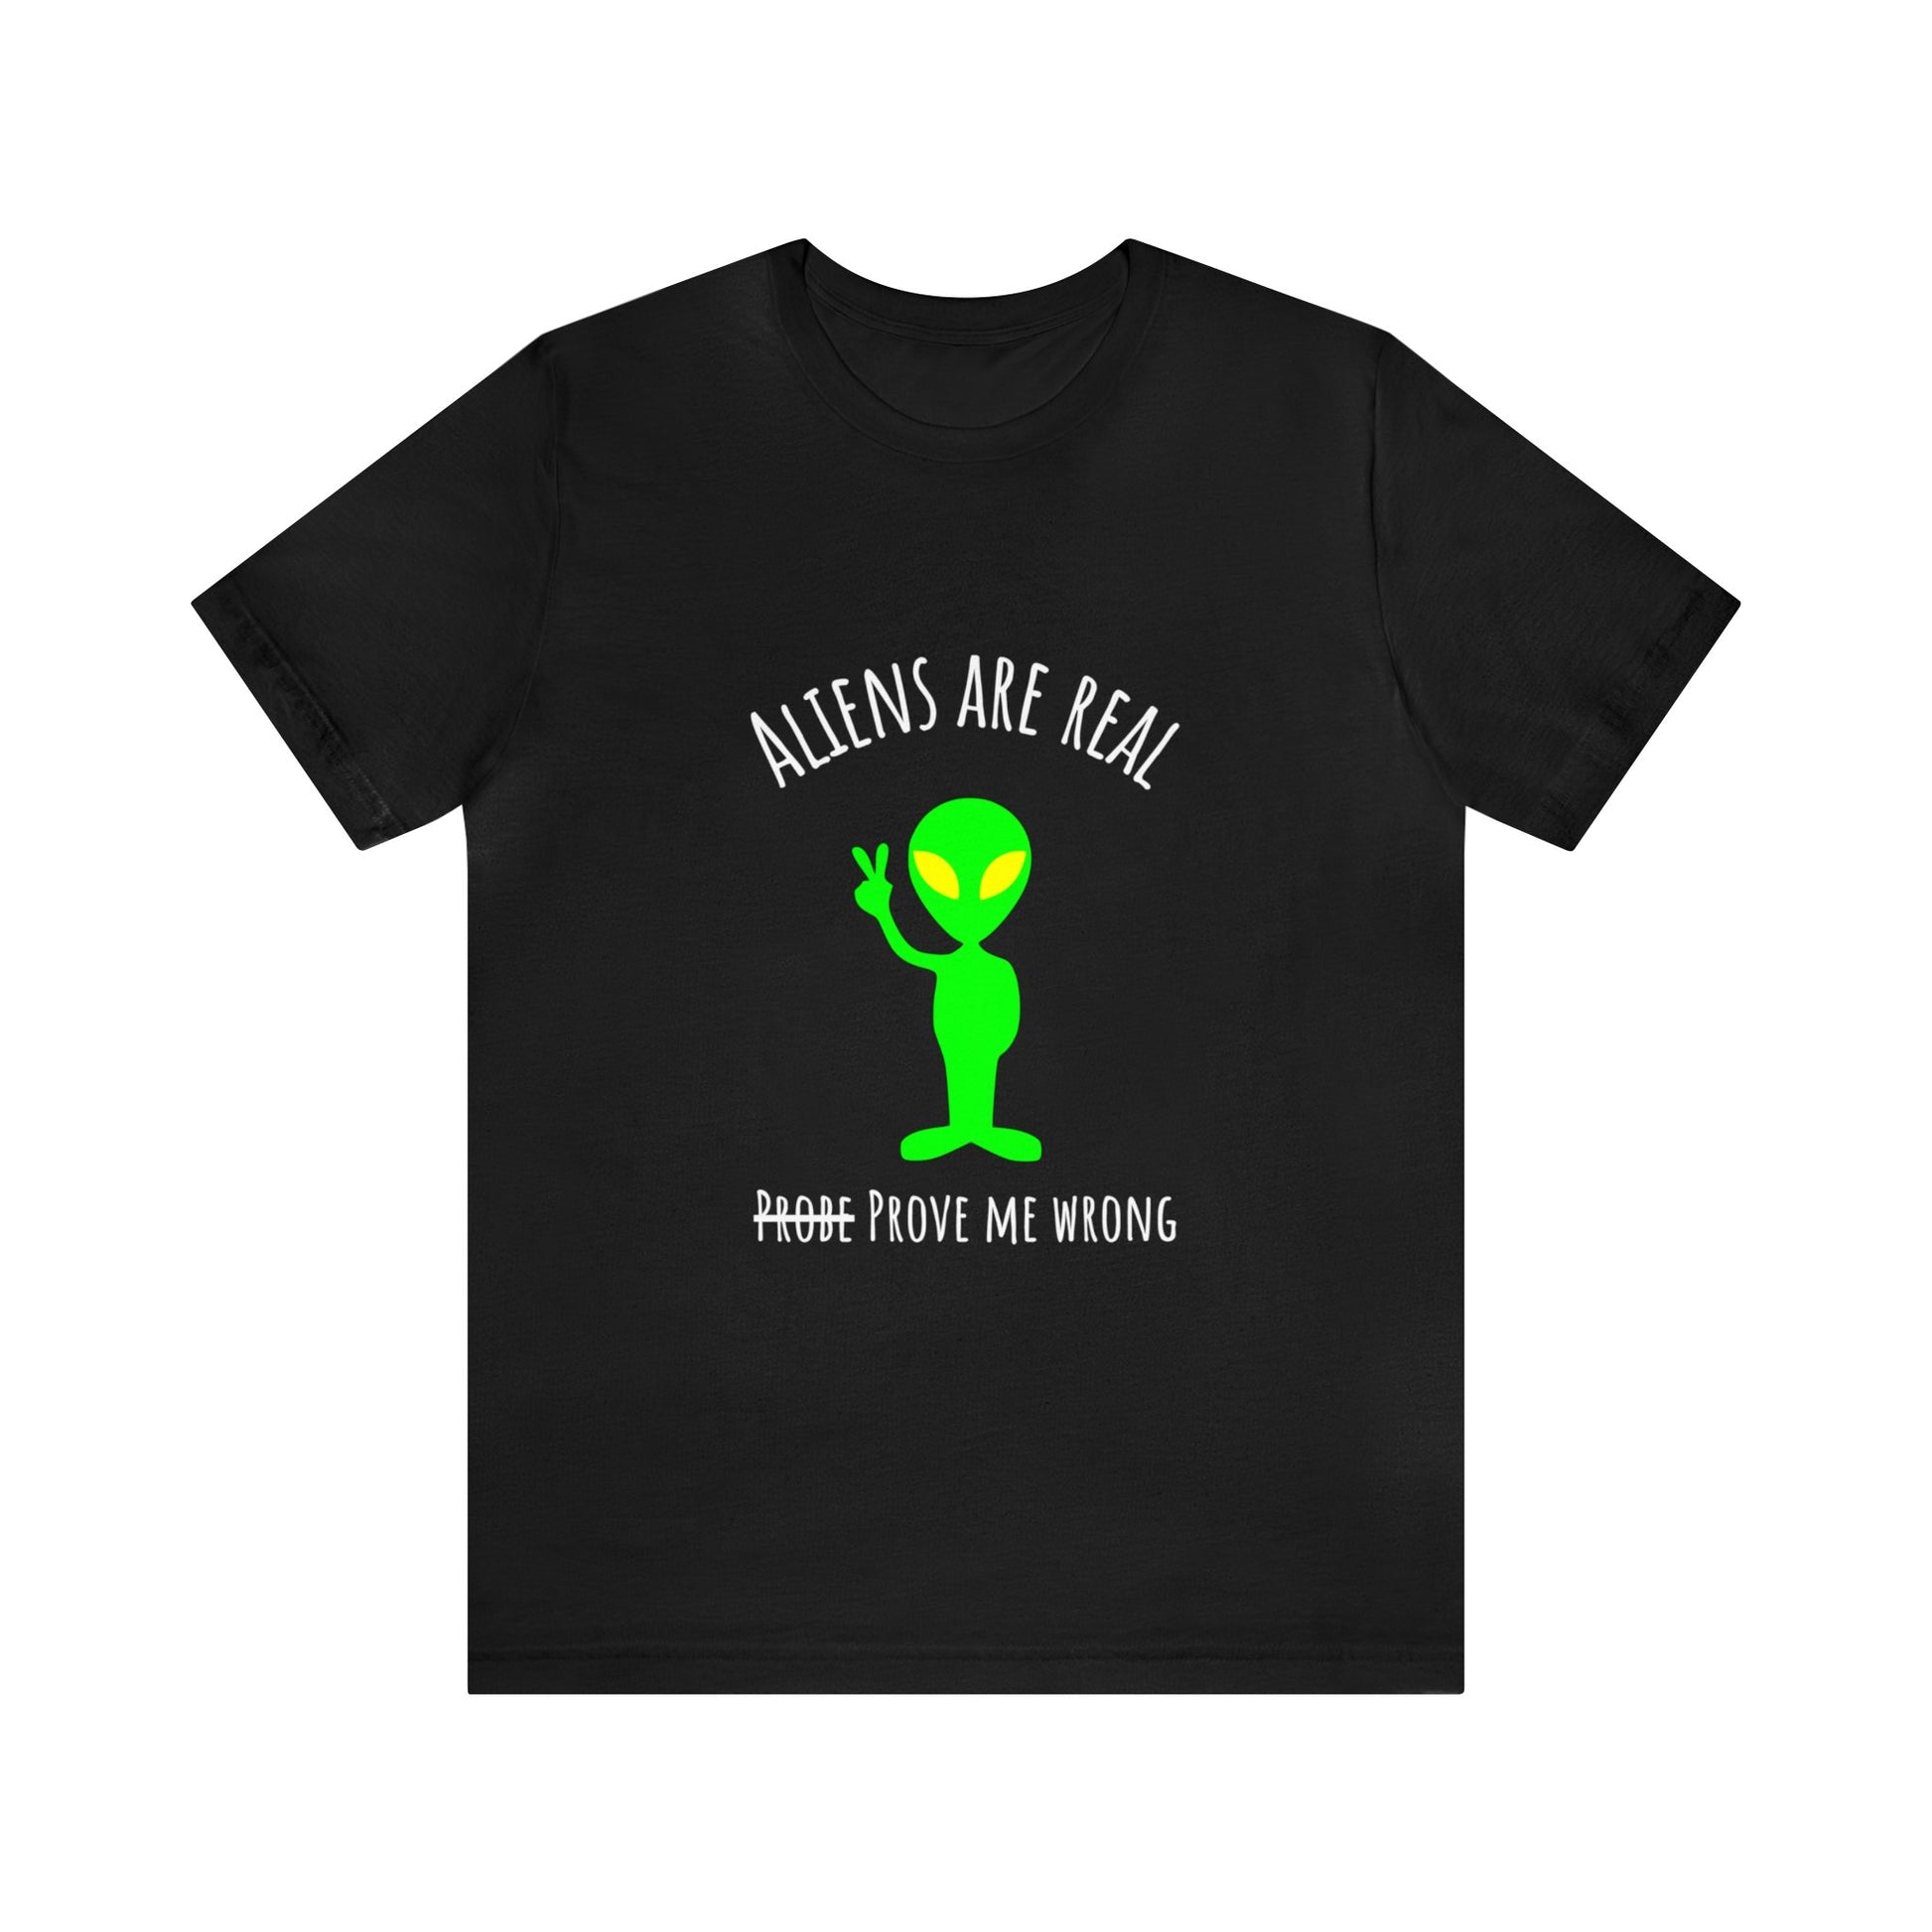 Aliens are real, "probe" me wrong Tee Shirt | Funny Alien Tee Shirt | Alien Convention Tee |  Funny UFO Sci-Fi Alien Probe Tee - CrazyTomTShirts